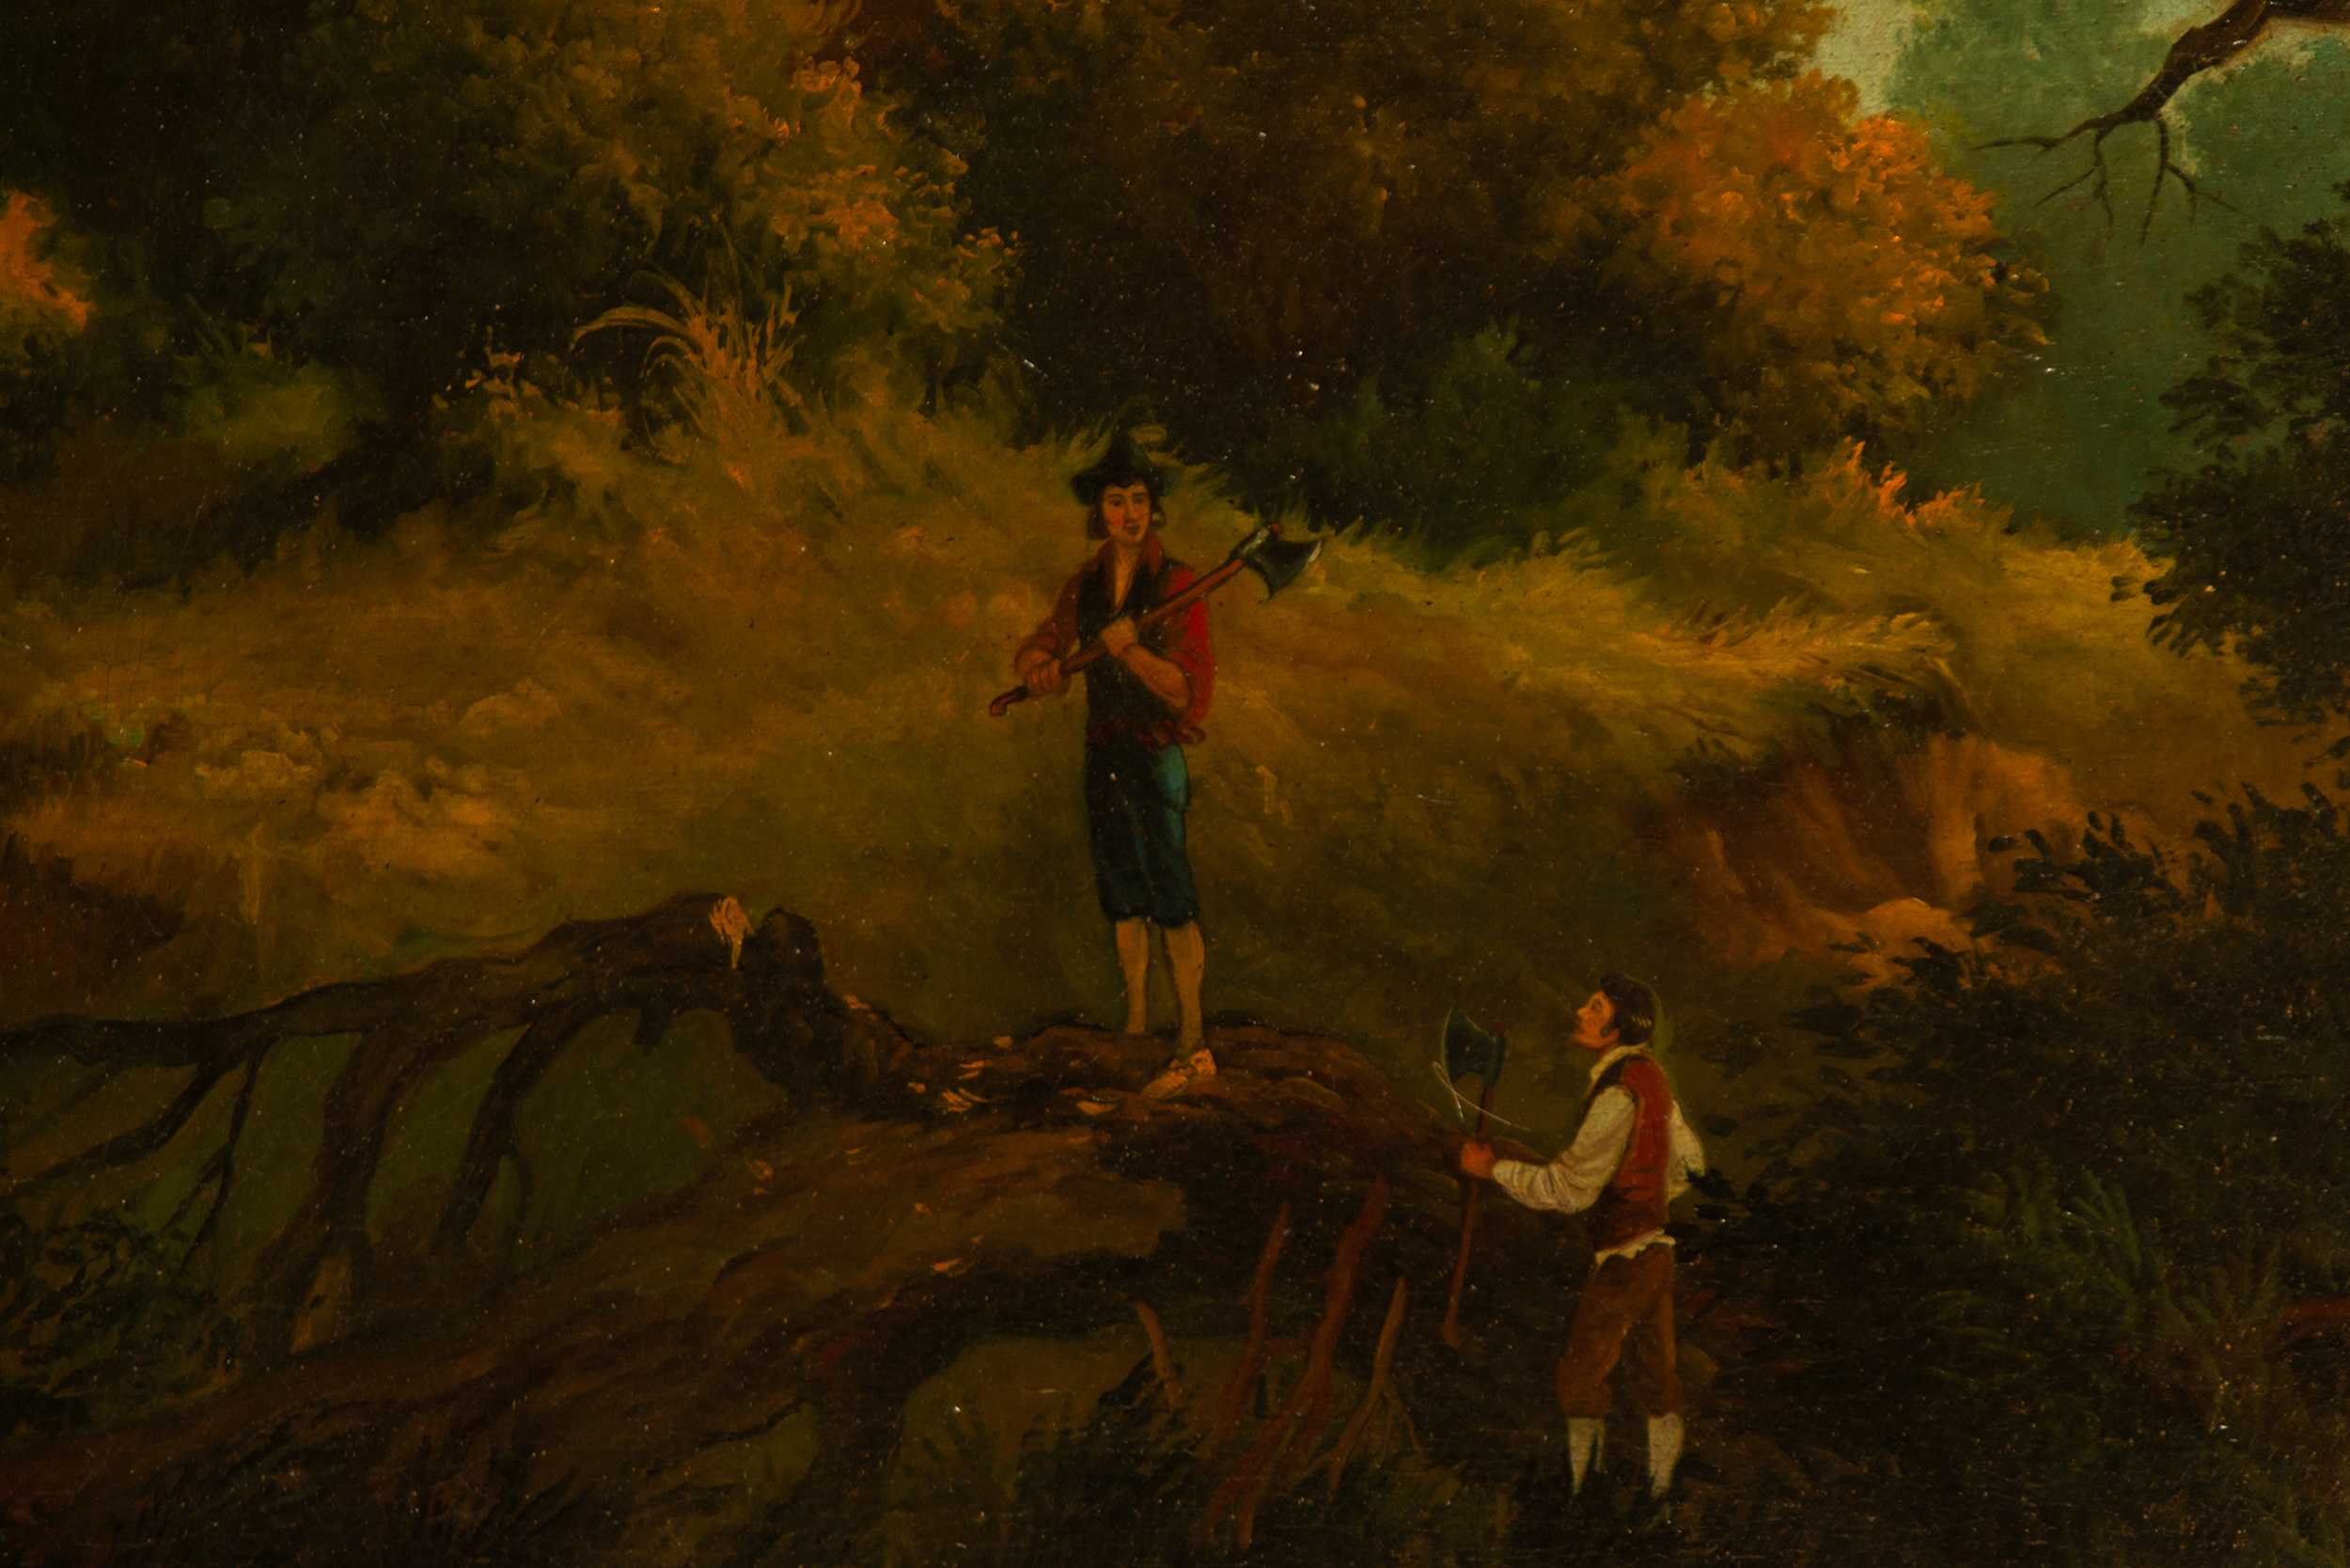 Country Scene with Woodcutters, 19th century Dutch school, following 17th century models - Image 5 of 6